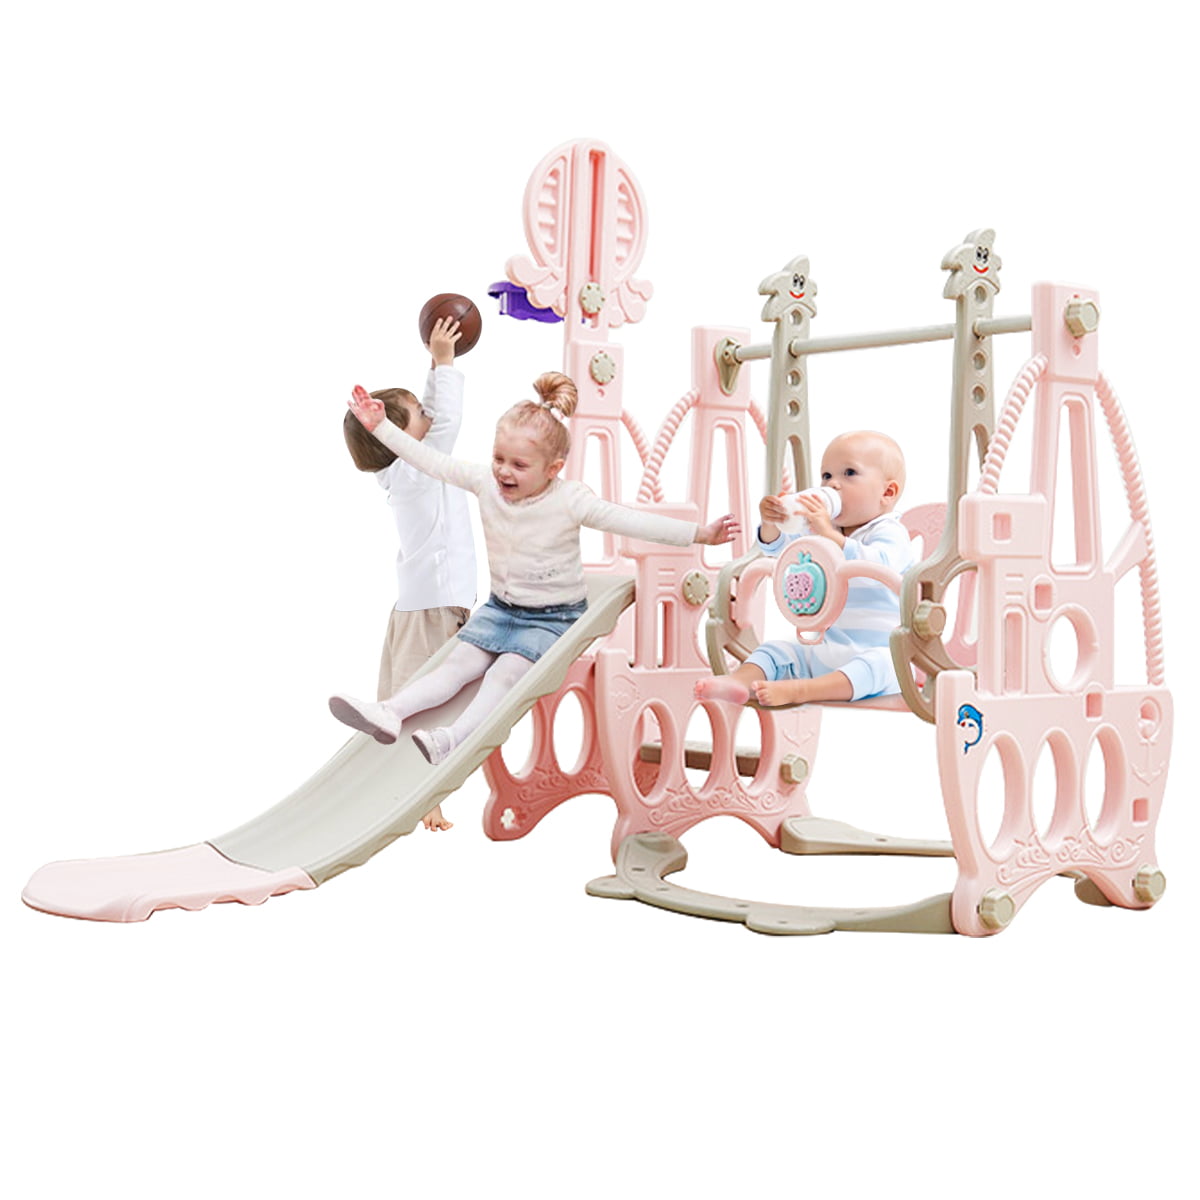 Details about   Large Toddler Climber And Swing Set Climber Sliding Playset w/ Basketball Hoop ❉ 